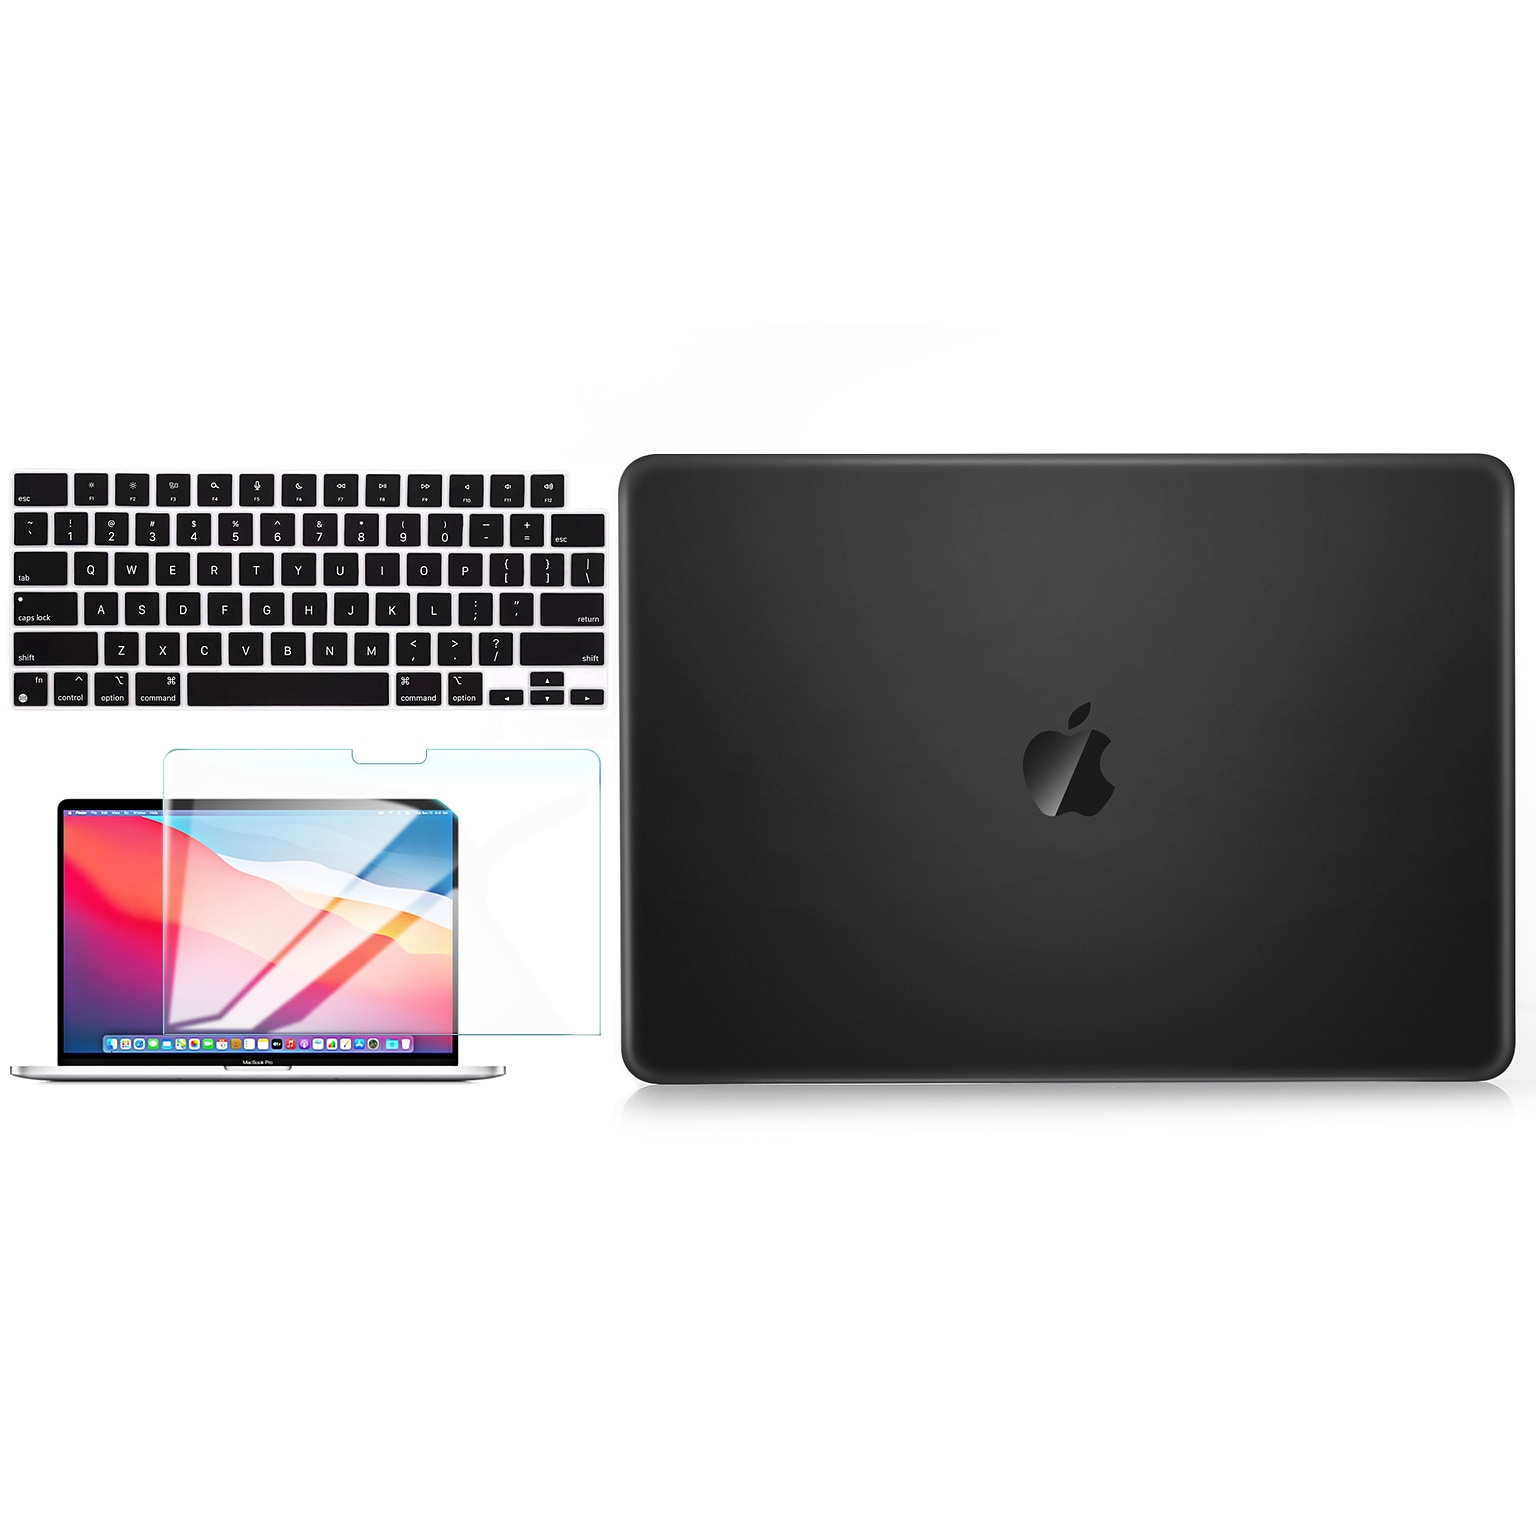 Techprotectus Case with Keyboard Cover/Screen Protector for Apple 16.2 MacBook Pro 2021, Black, Plastic (TP-BK-K-MP16M1X)